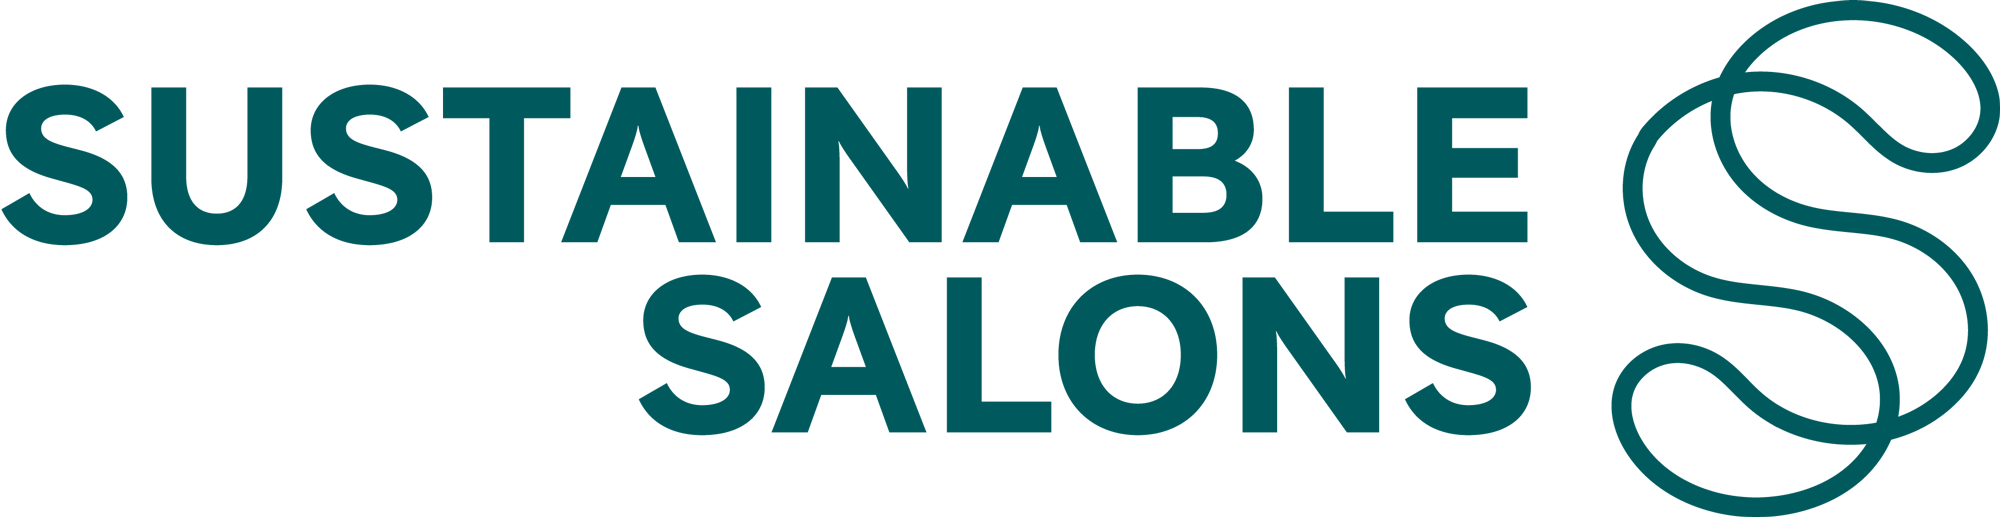 sustainable salons green